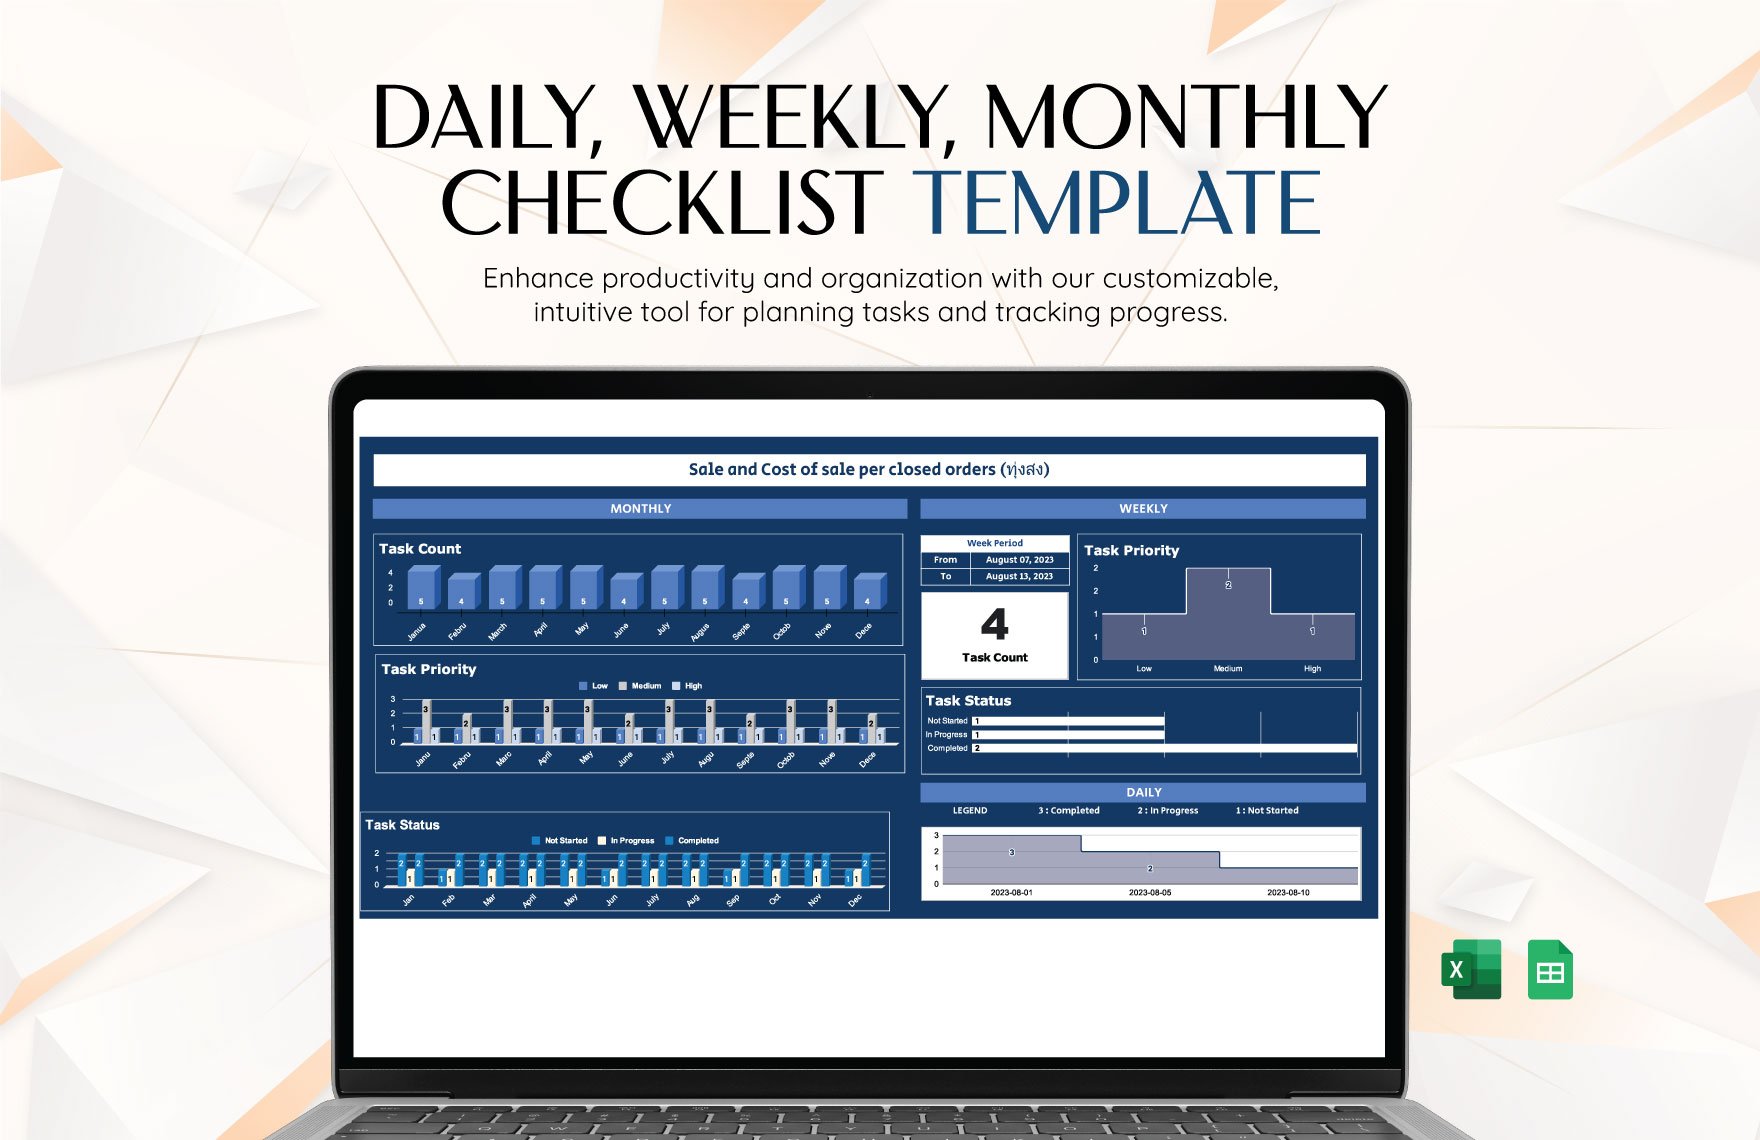 Free Daily, Weekly, Monthly Checklist Template in Excel, Google Sheets